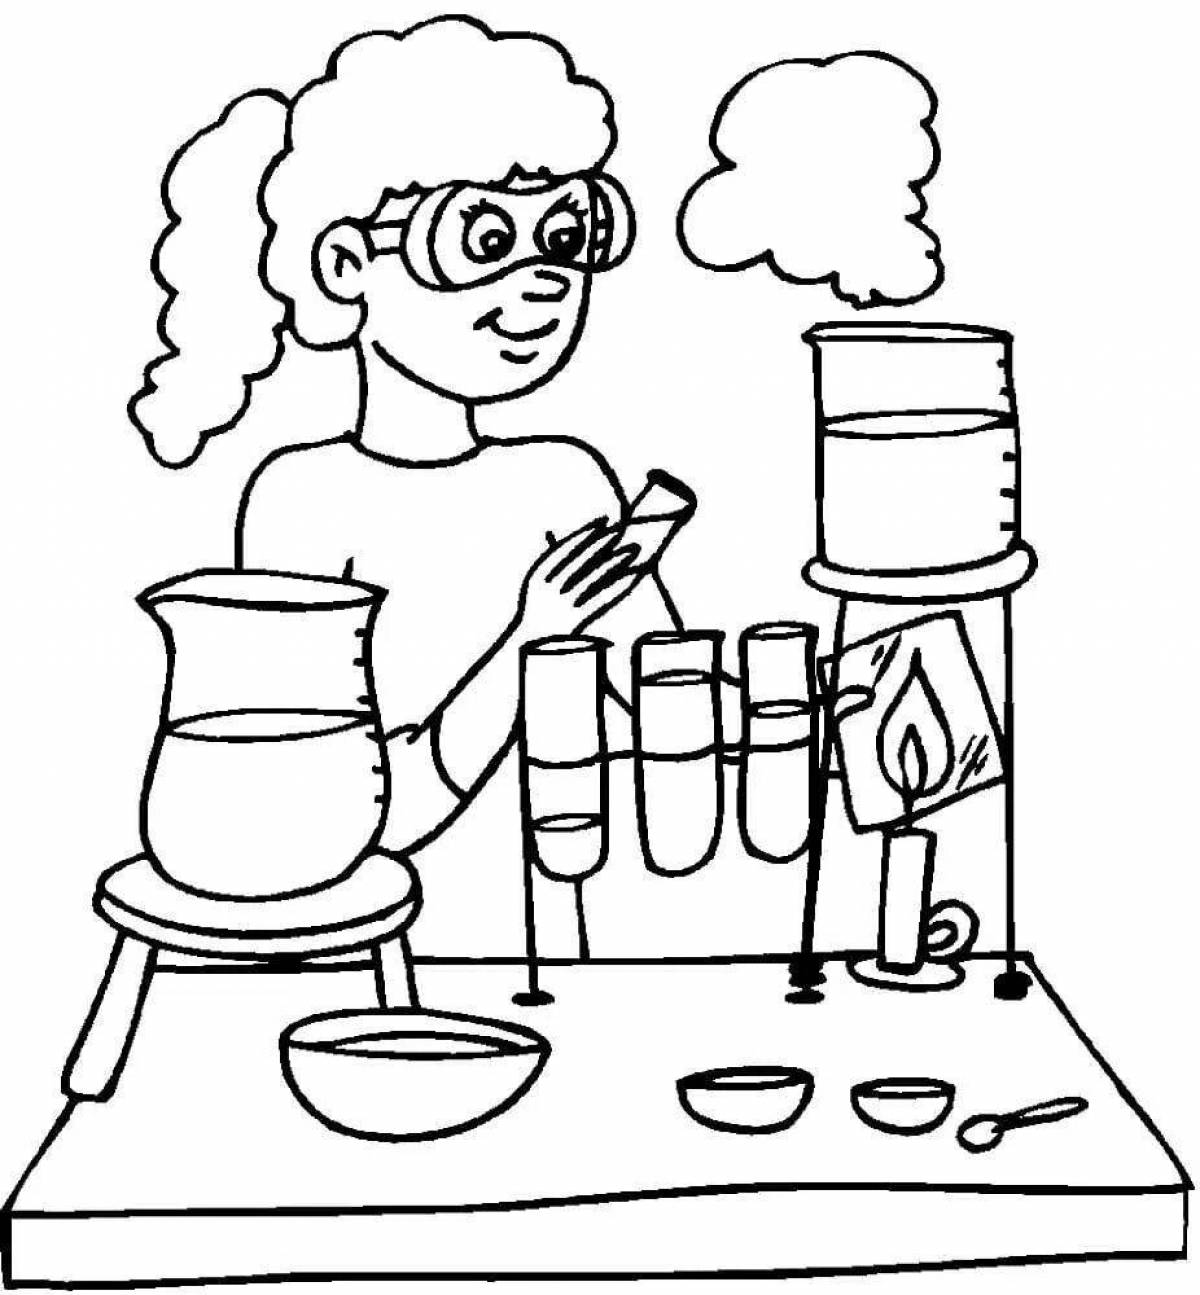 Playful science coloring book